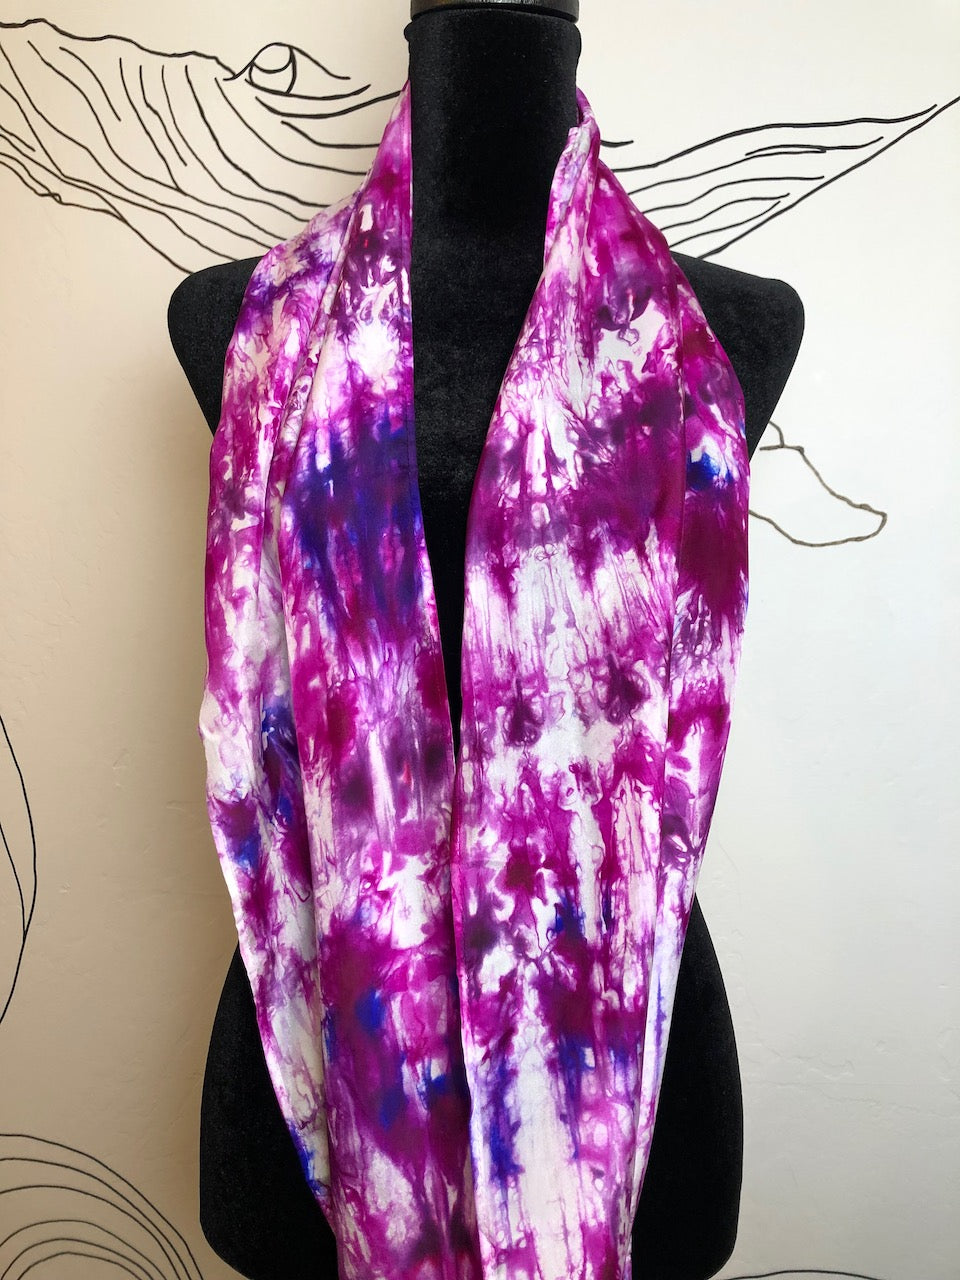 Lesliegh McDaniel: "Wine-stained Lips" Silk Scarf